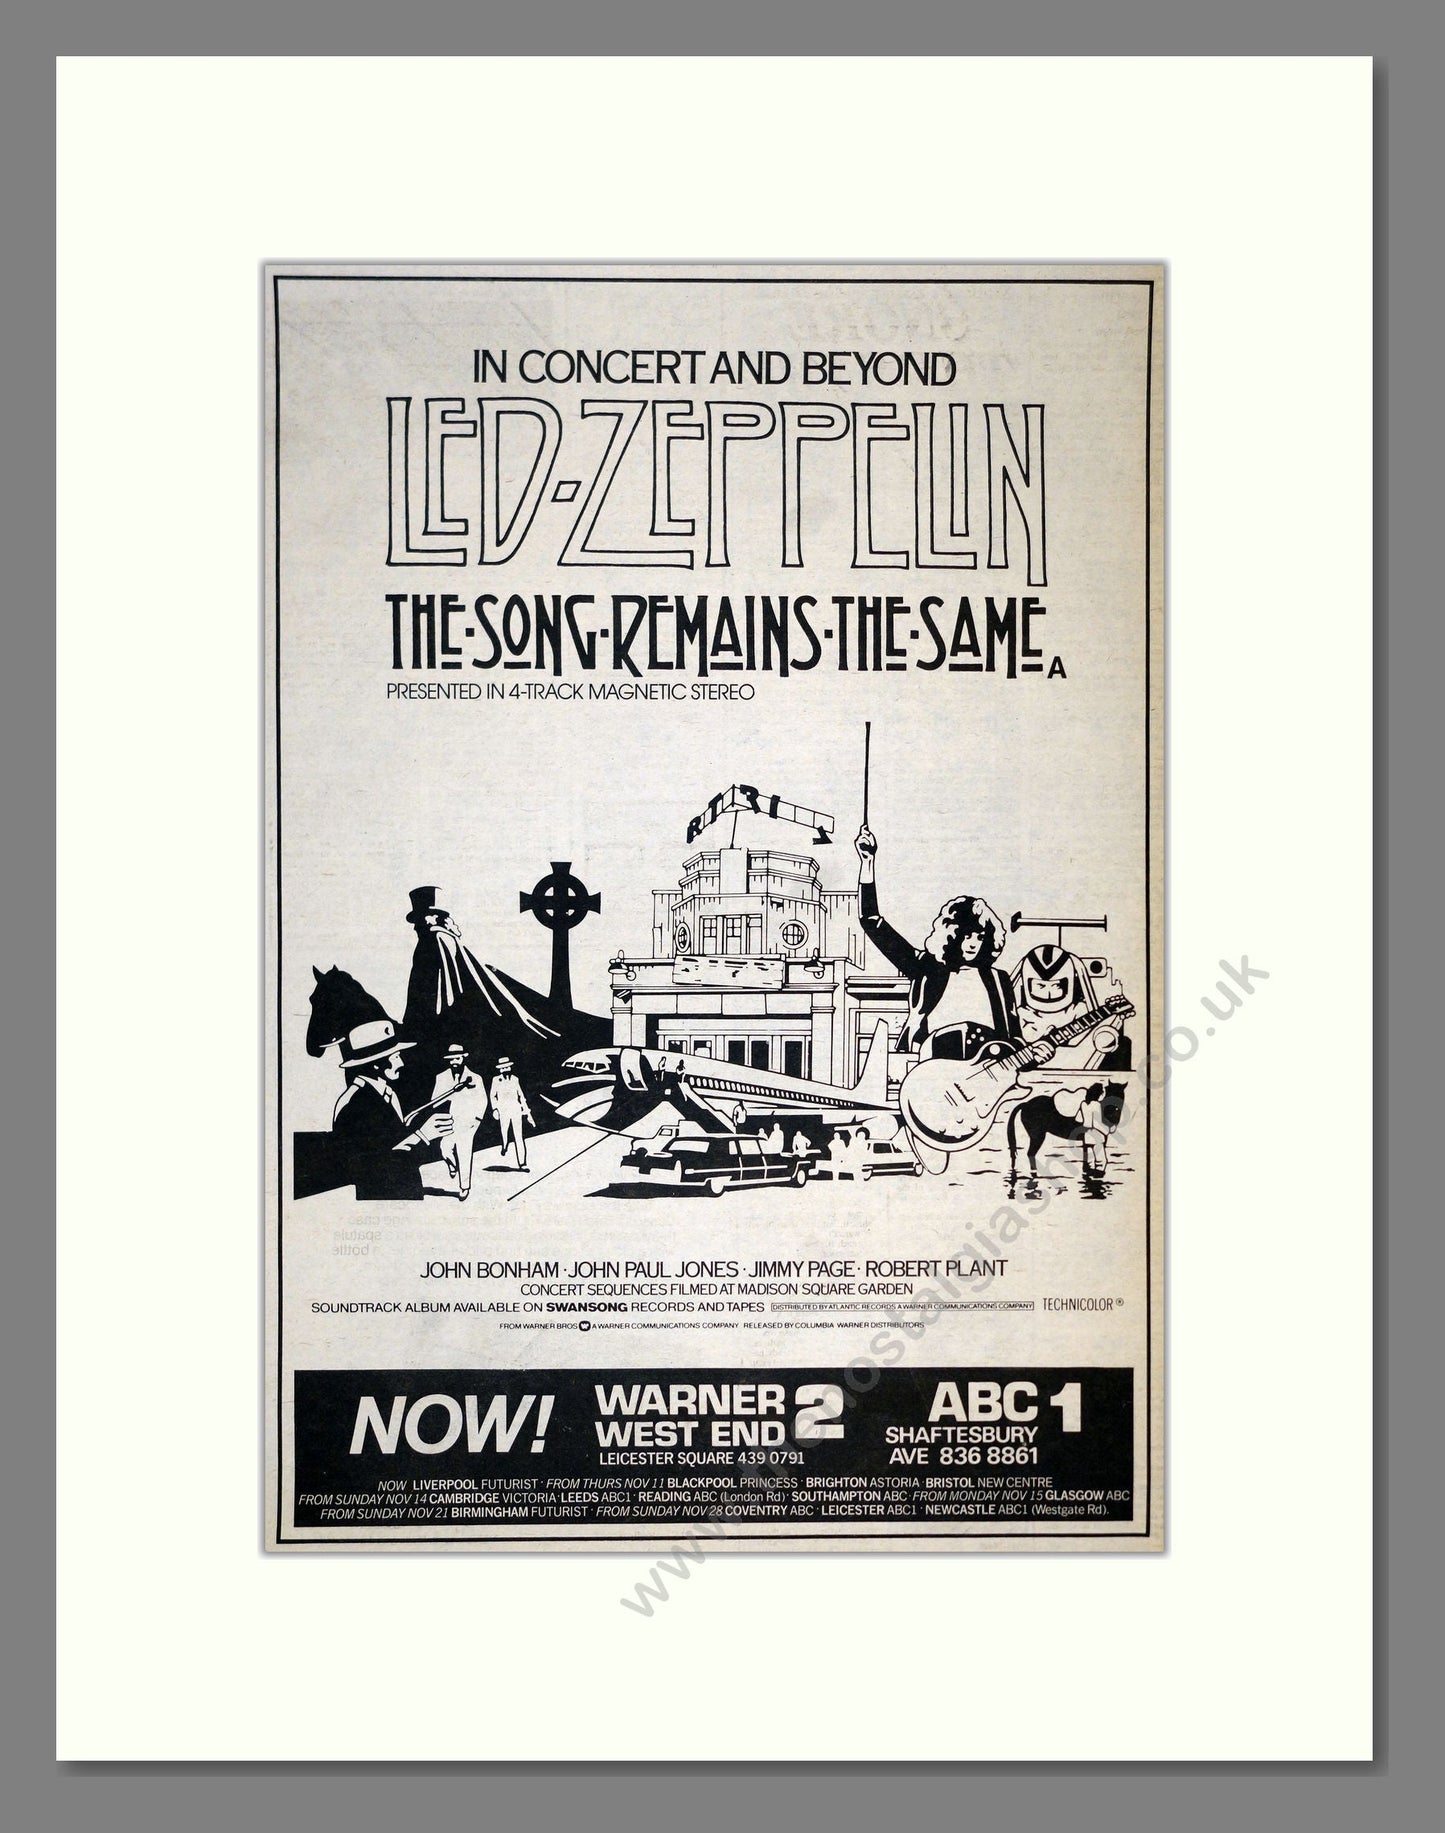 Led Zeppelin - The Song Remains The Same. Vintage Advert 1976 (ref AD18010)